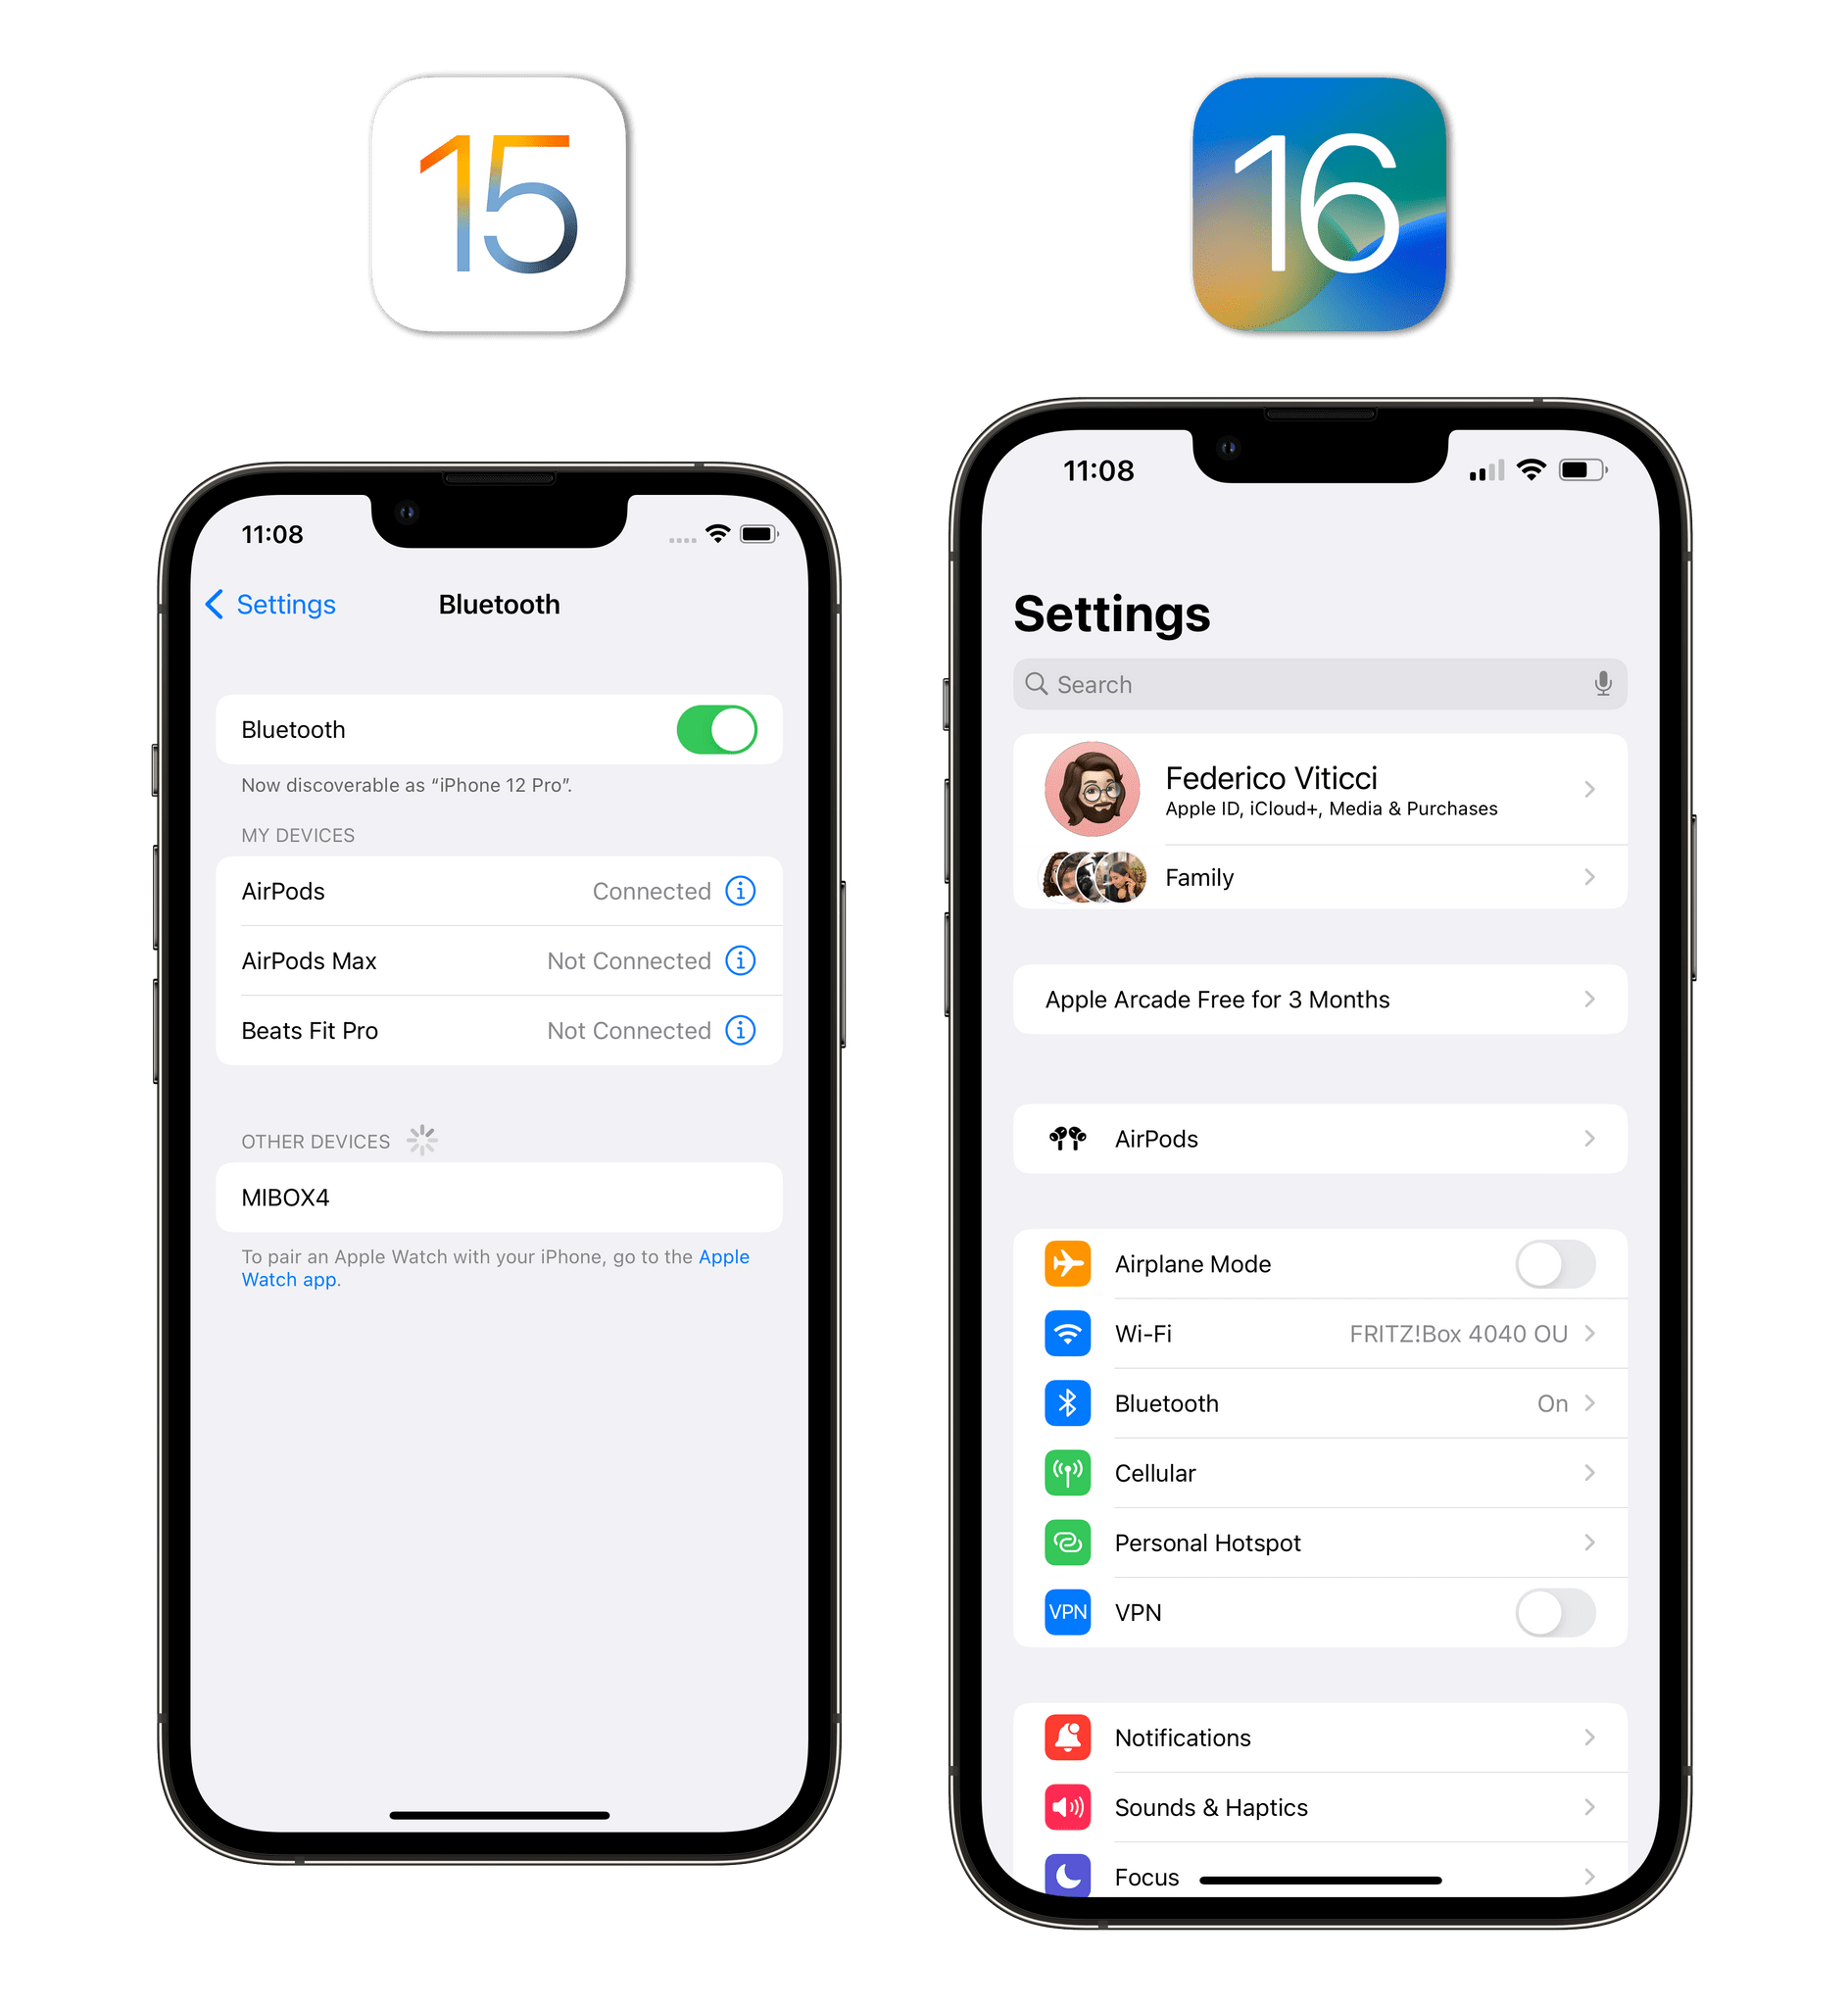 No more need to go find connected AirPods in Bluetooth settings.